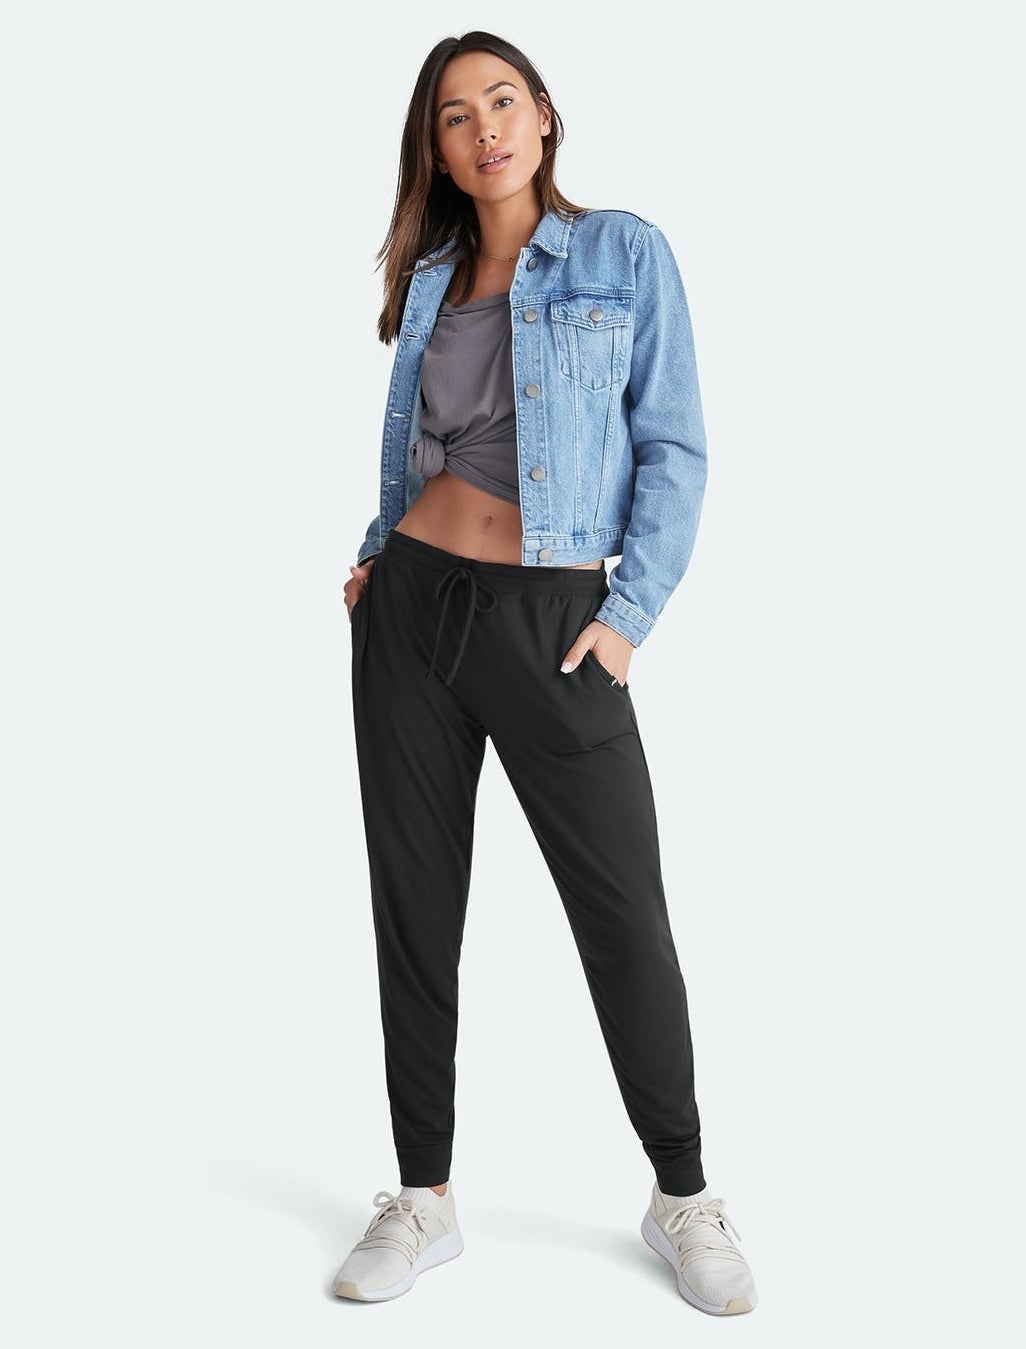 a model wearing black jogger pants with a denim jacket and sneakers